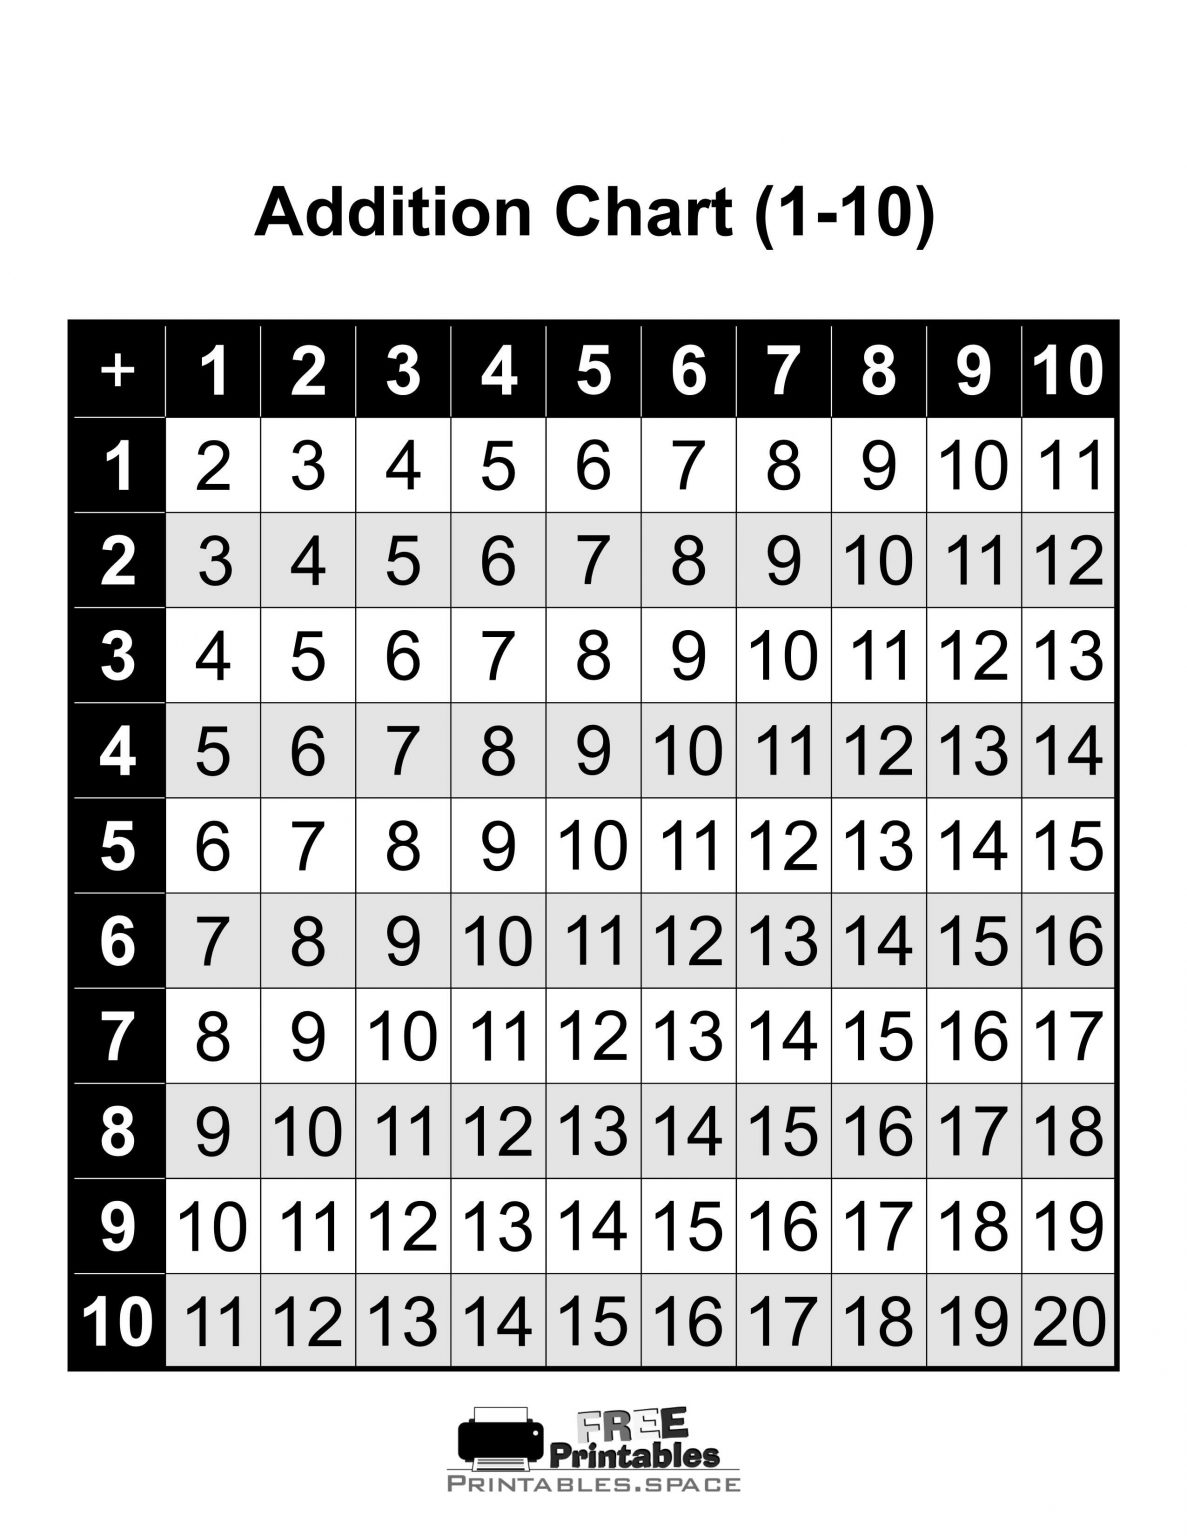 addition-chart-1-to-10-free-printables